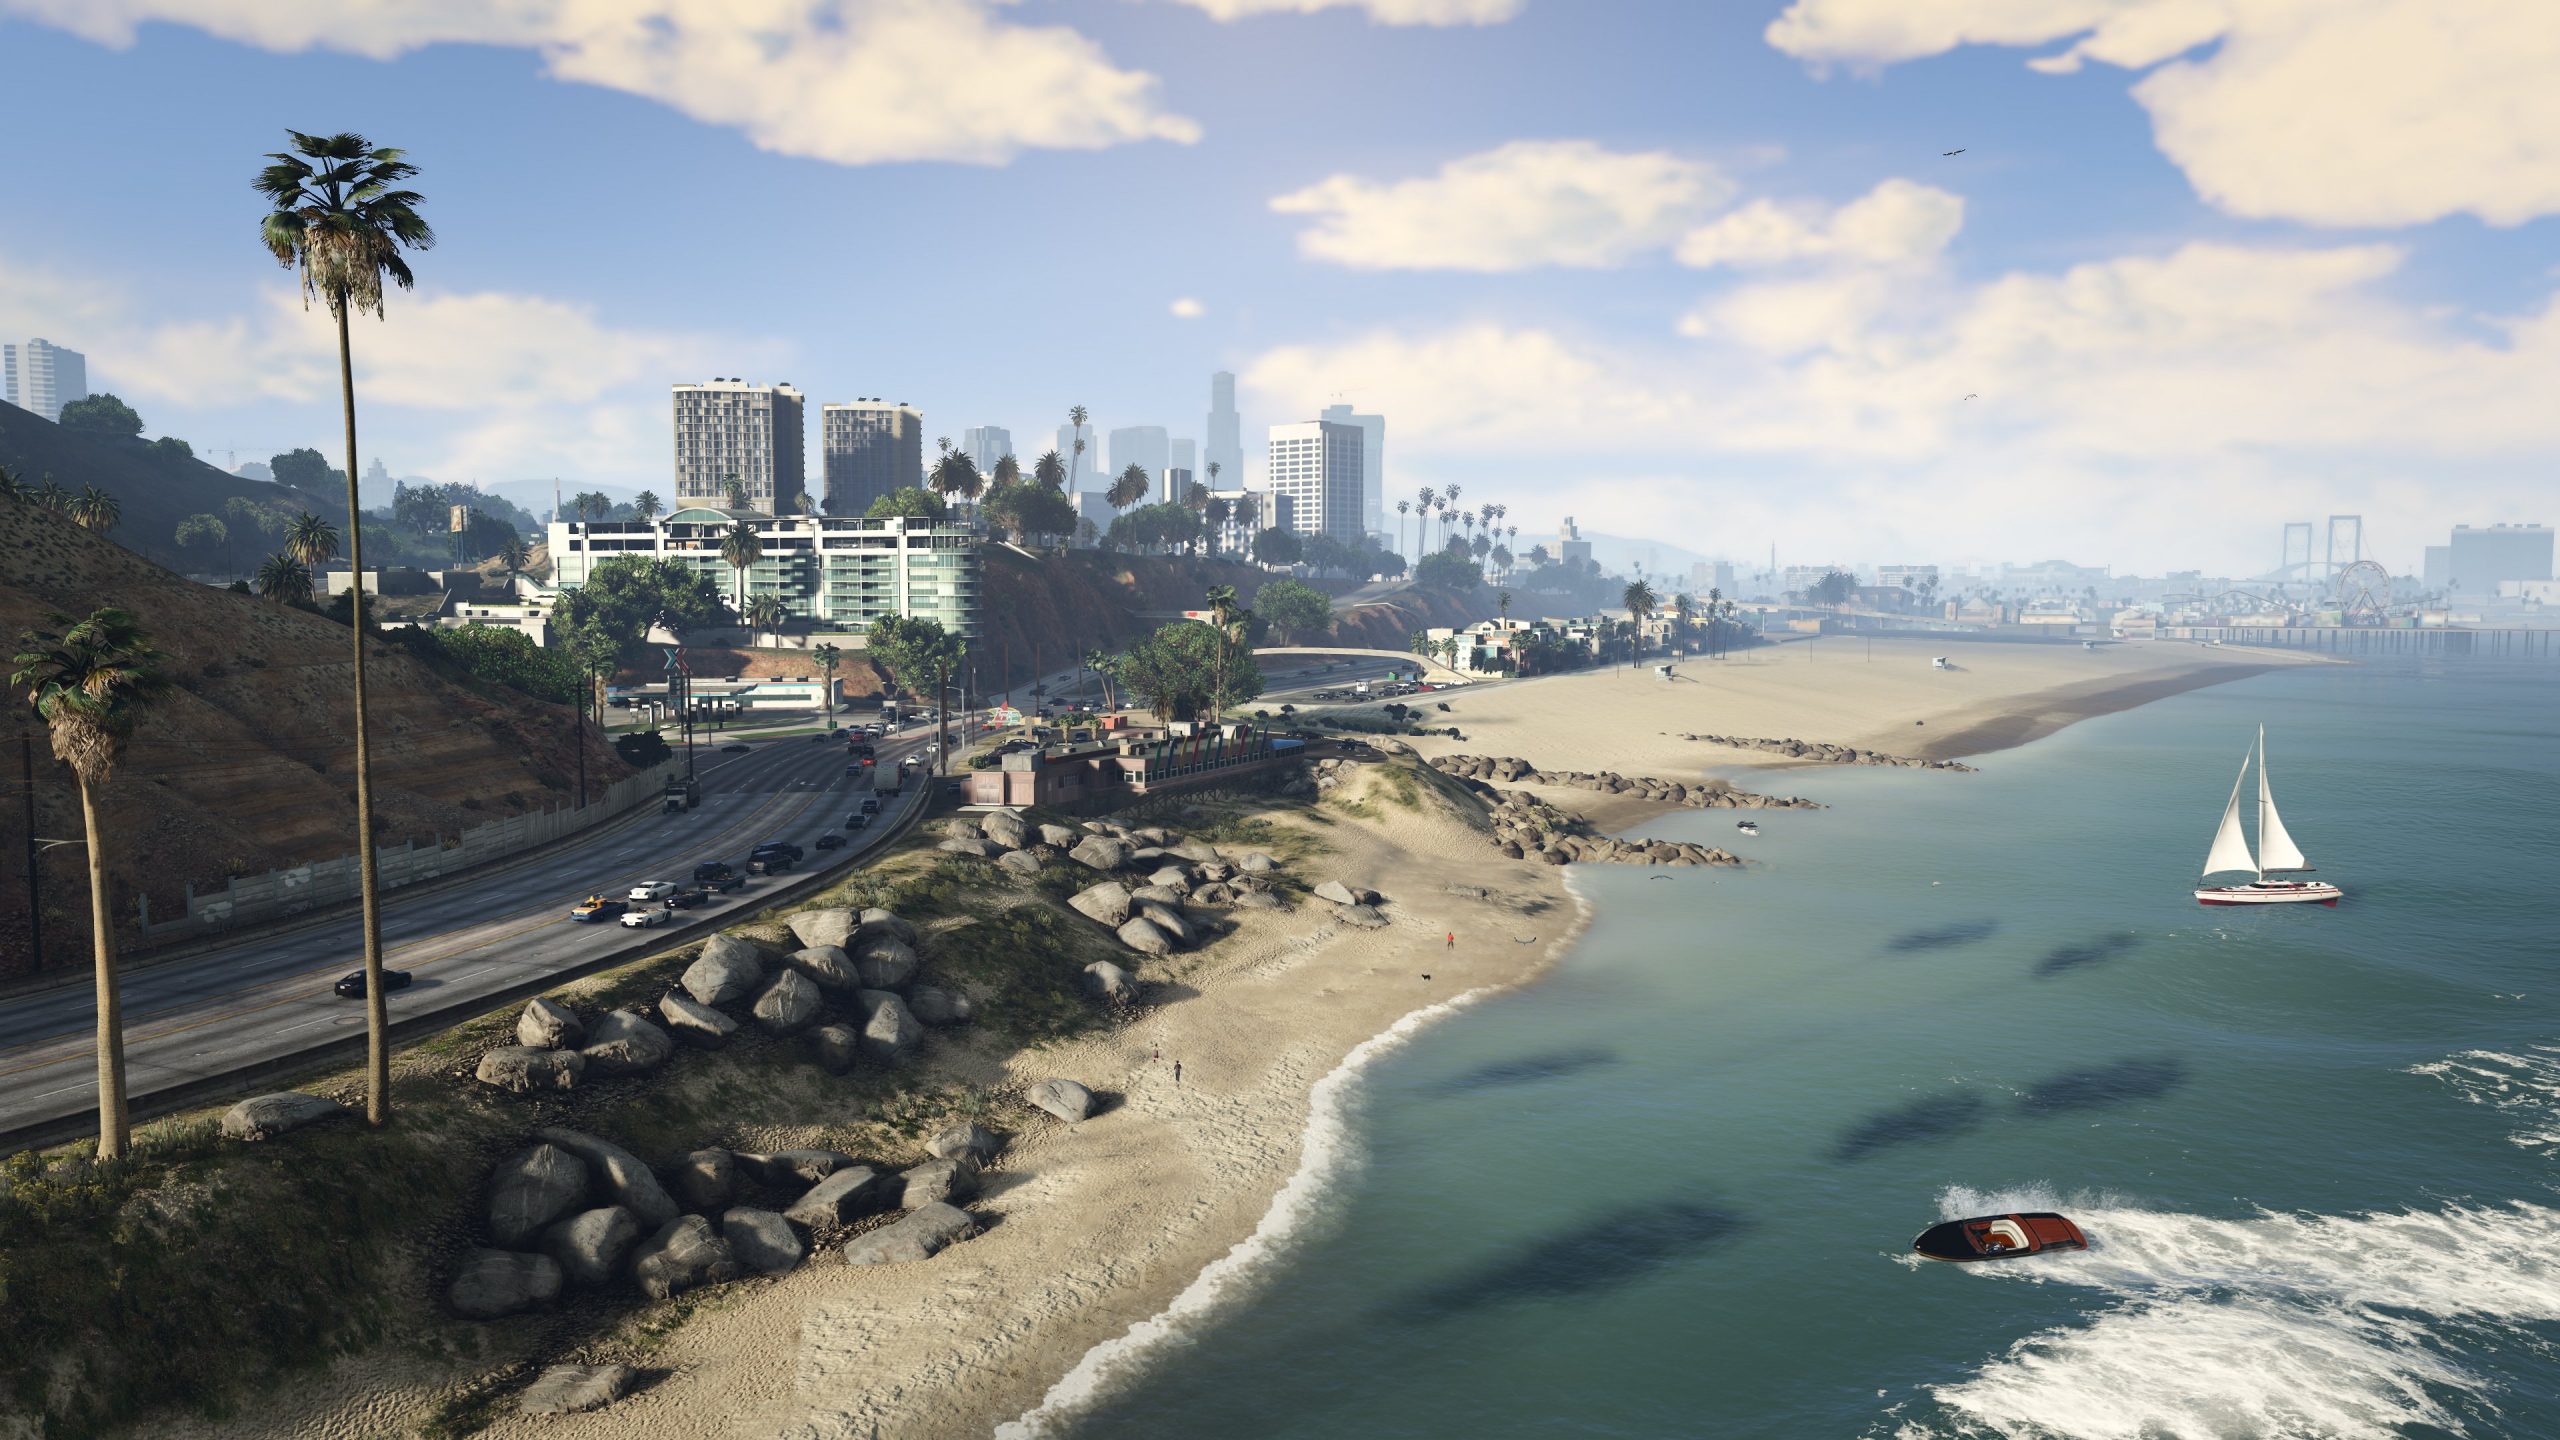 Netflix in talks to make new Grand Theft Auto game according to report
Latest